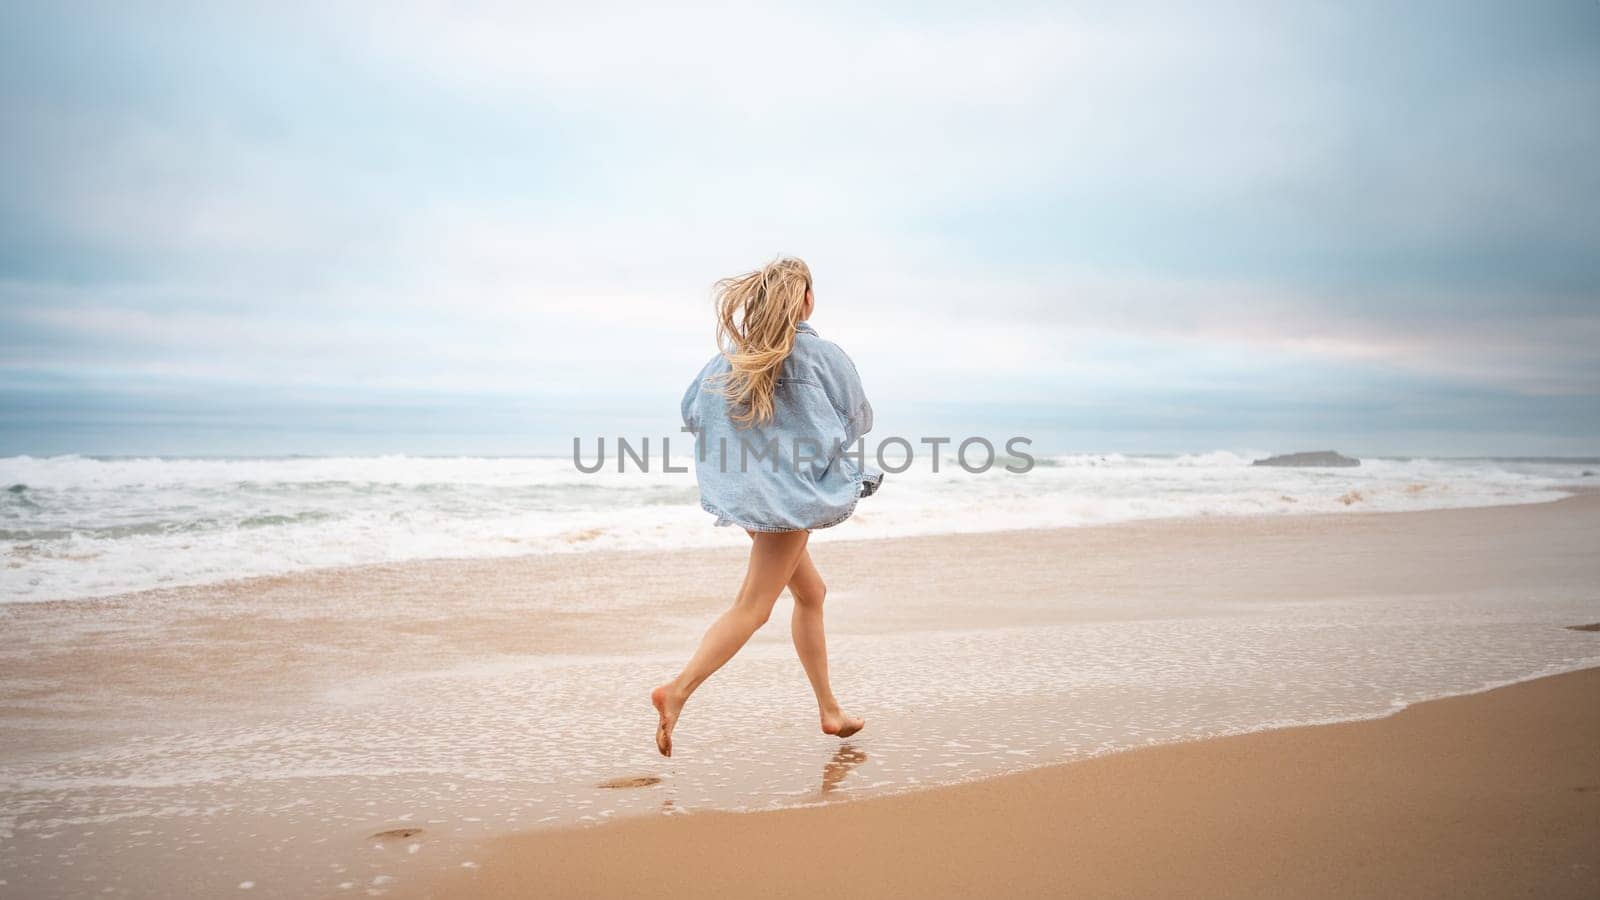 Full length of carefree woman with blond hair running along sea on sandy beach. Rear view of female tourist in denim shirt on summer vacation. Excited lady is on beach holiday.